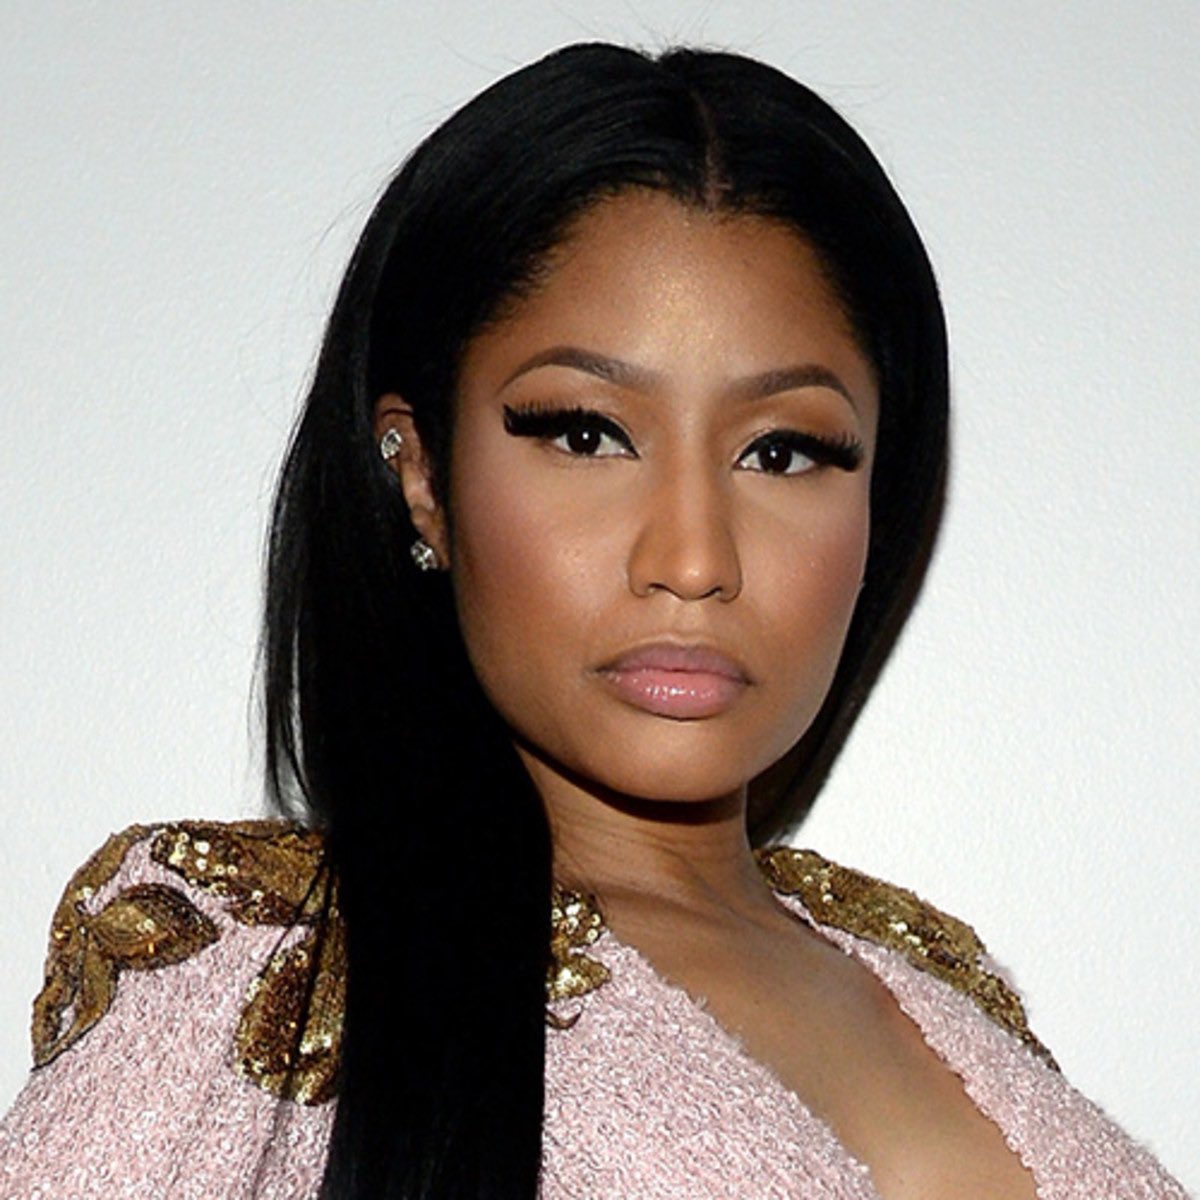 “Looking like Pocahontas, ya they want my land bitch”Nicki uses Pocahontas as an equivalent for Native Americans in general, referencing how the Europeans crossed over and seized their land. Nicki’s land is her empire & her top spot won’t be as easily taken by the competition.